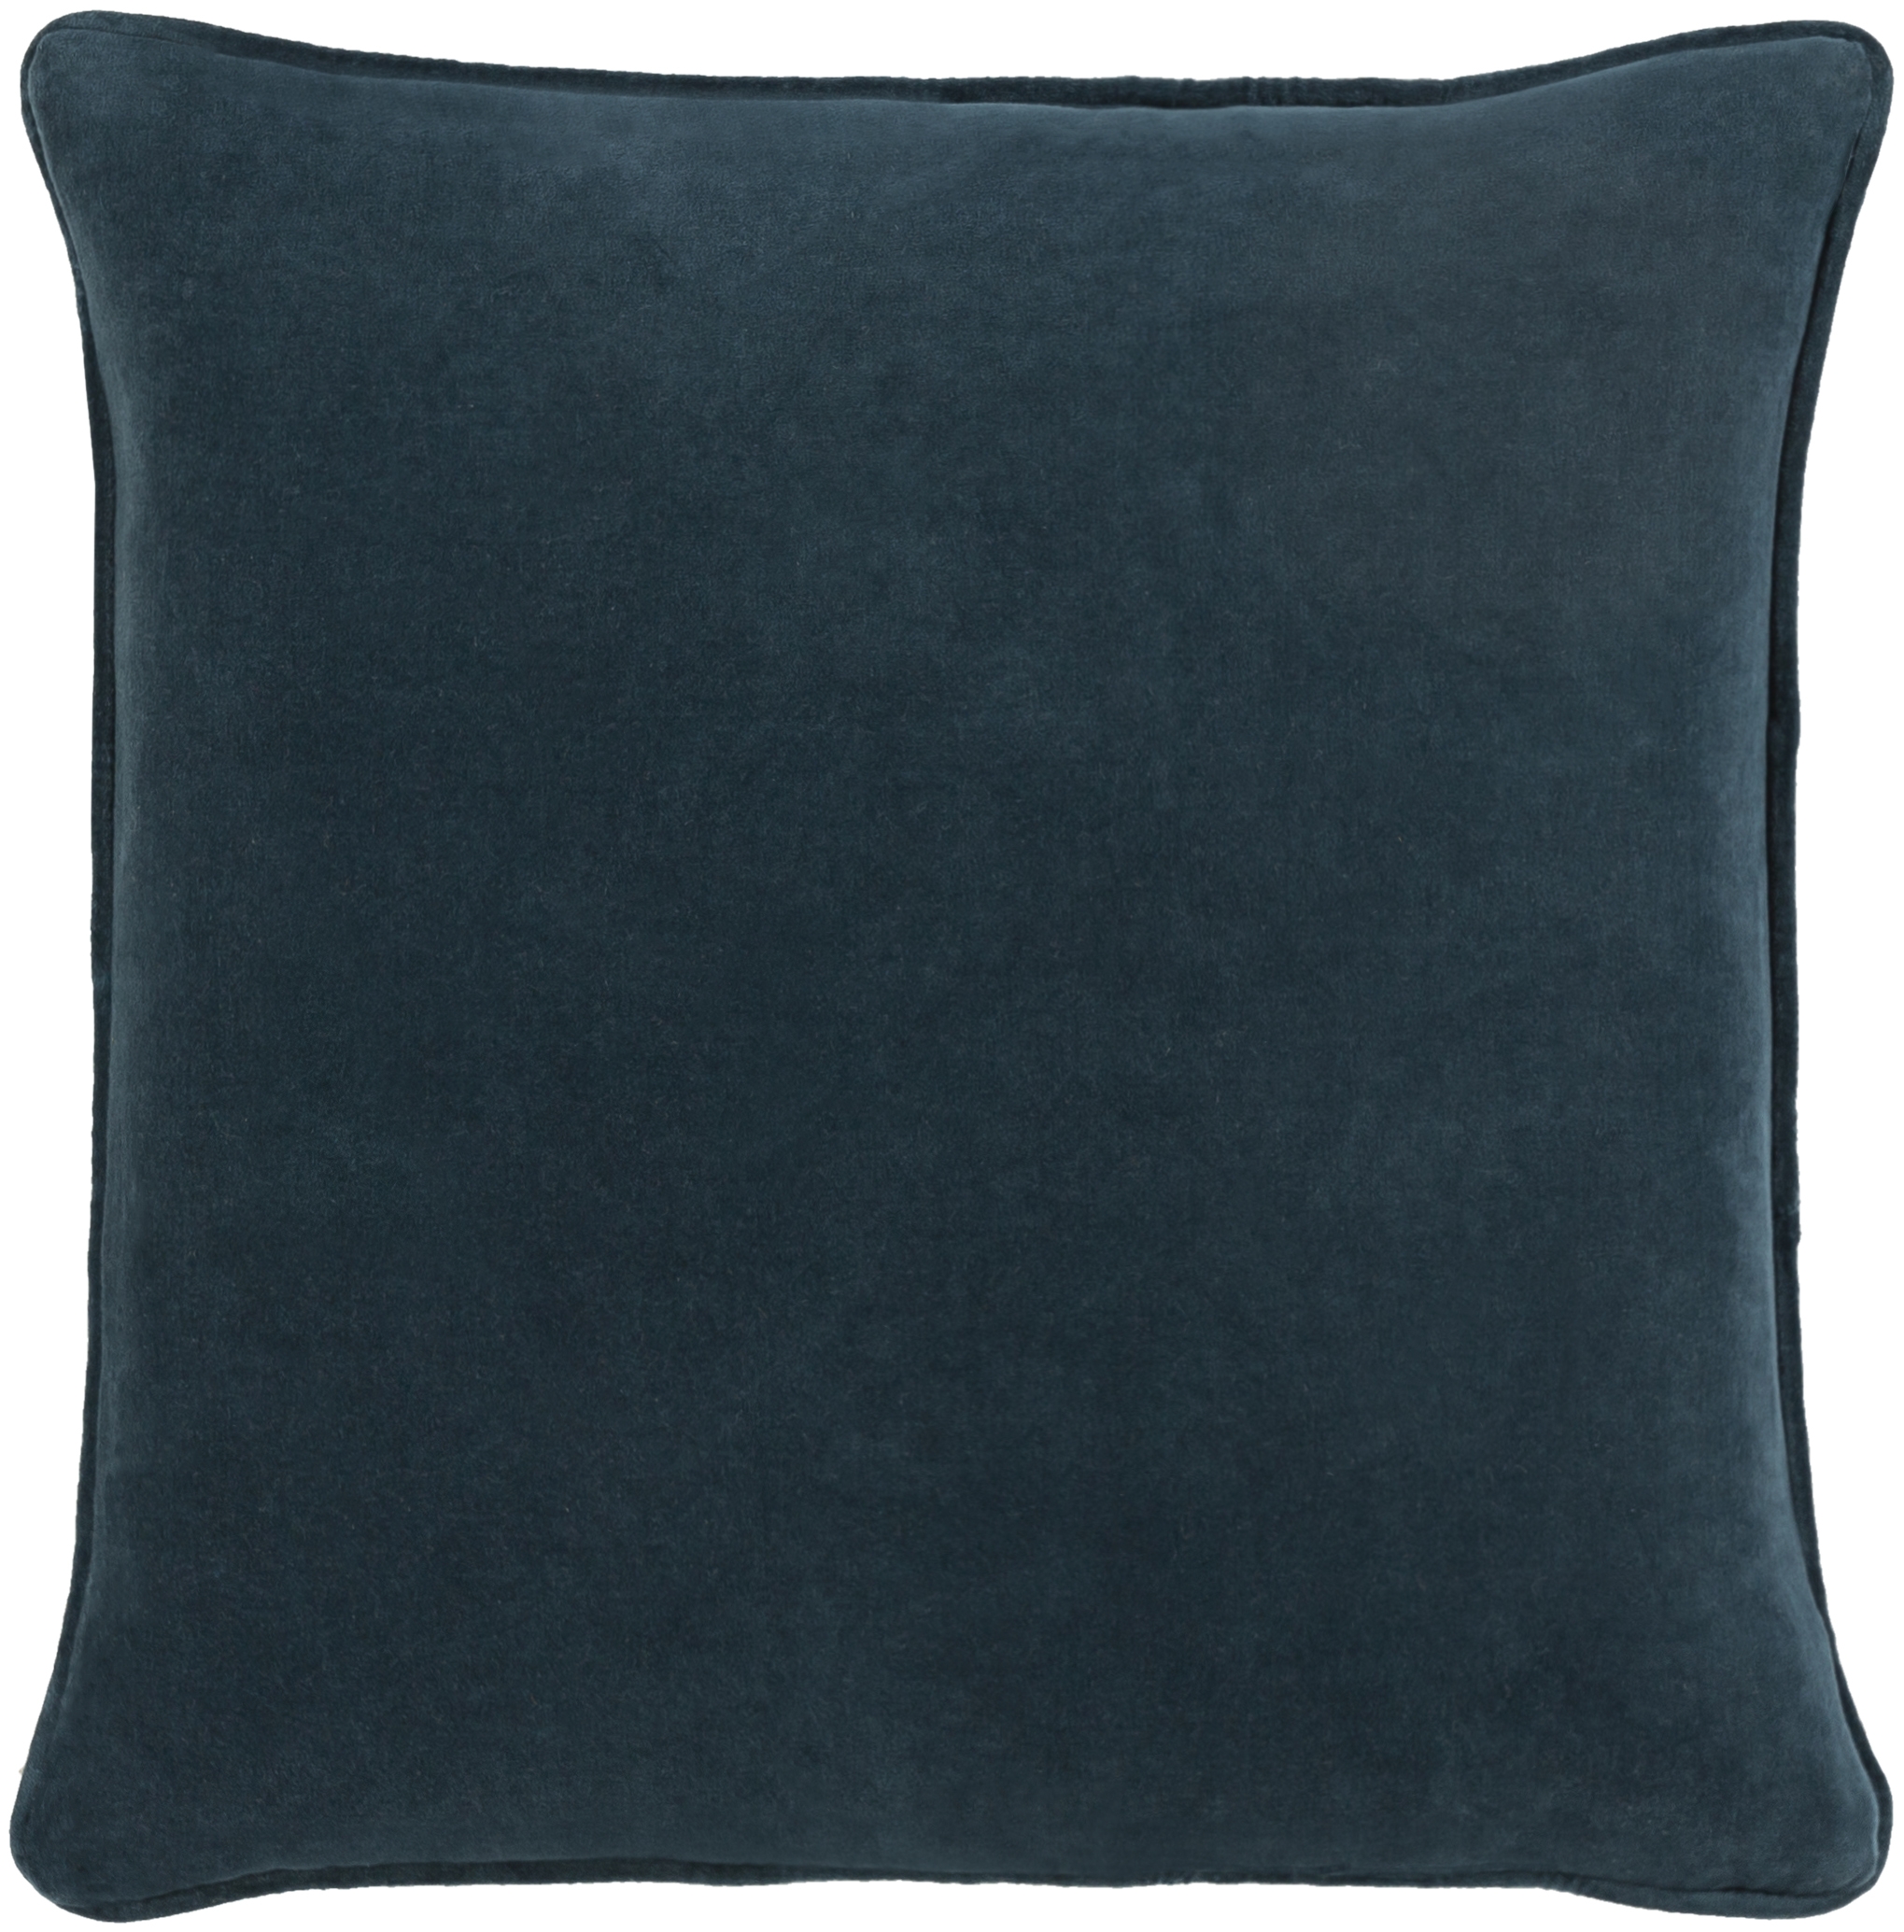 Safflower Throw Pillow, 20" x 20", with down insert - Image 0